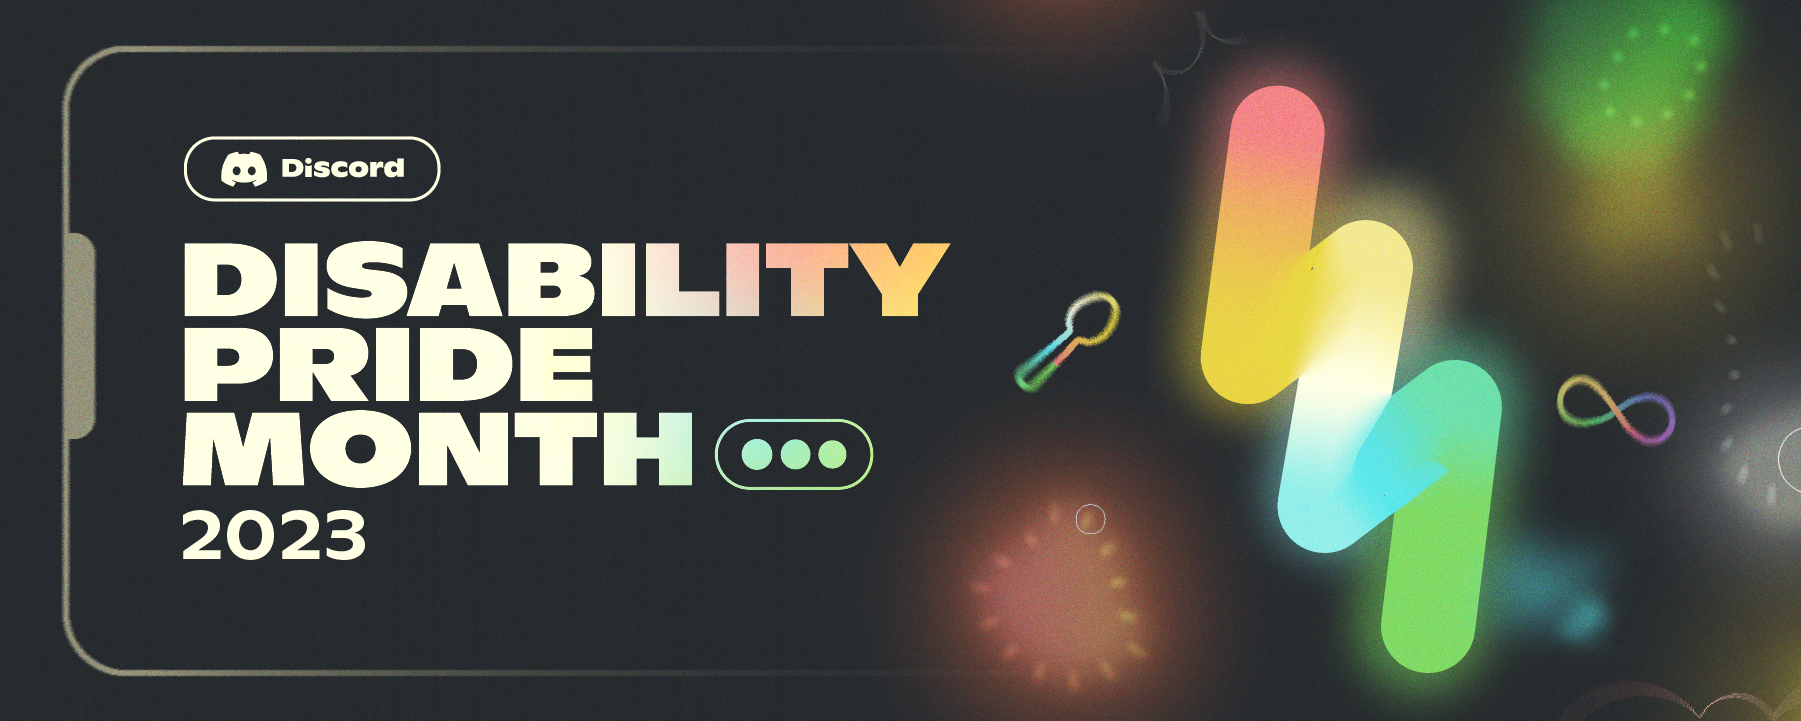 Hero imagery for Disability Pride Month. Depictions include lighting bolts and a rainbow spoon. The artwork says "Disability Pride Month 2023."